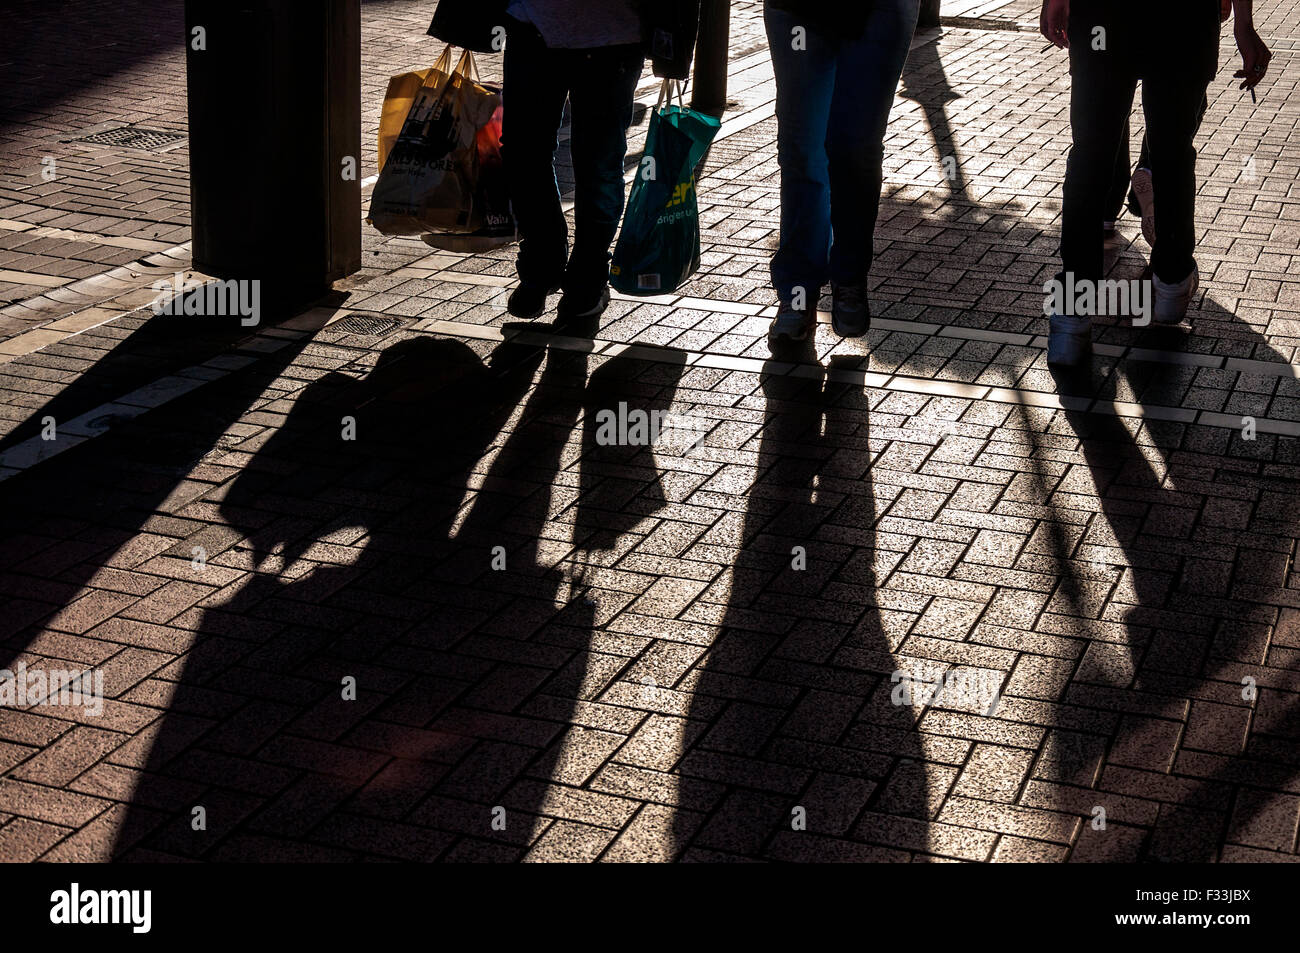 Pedestrians shoppers in Dublin, Ireland with plastic carrier shopping bags Stock Photo